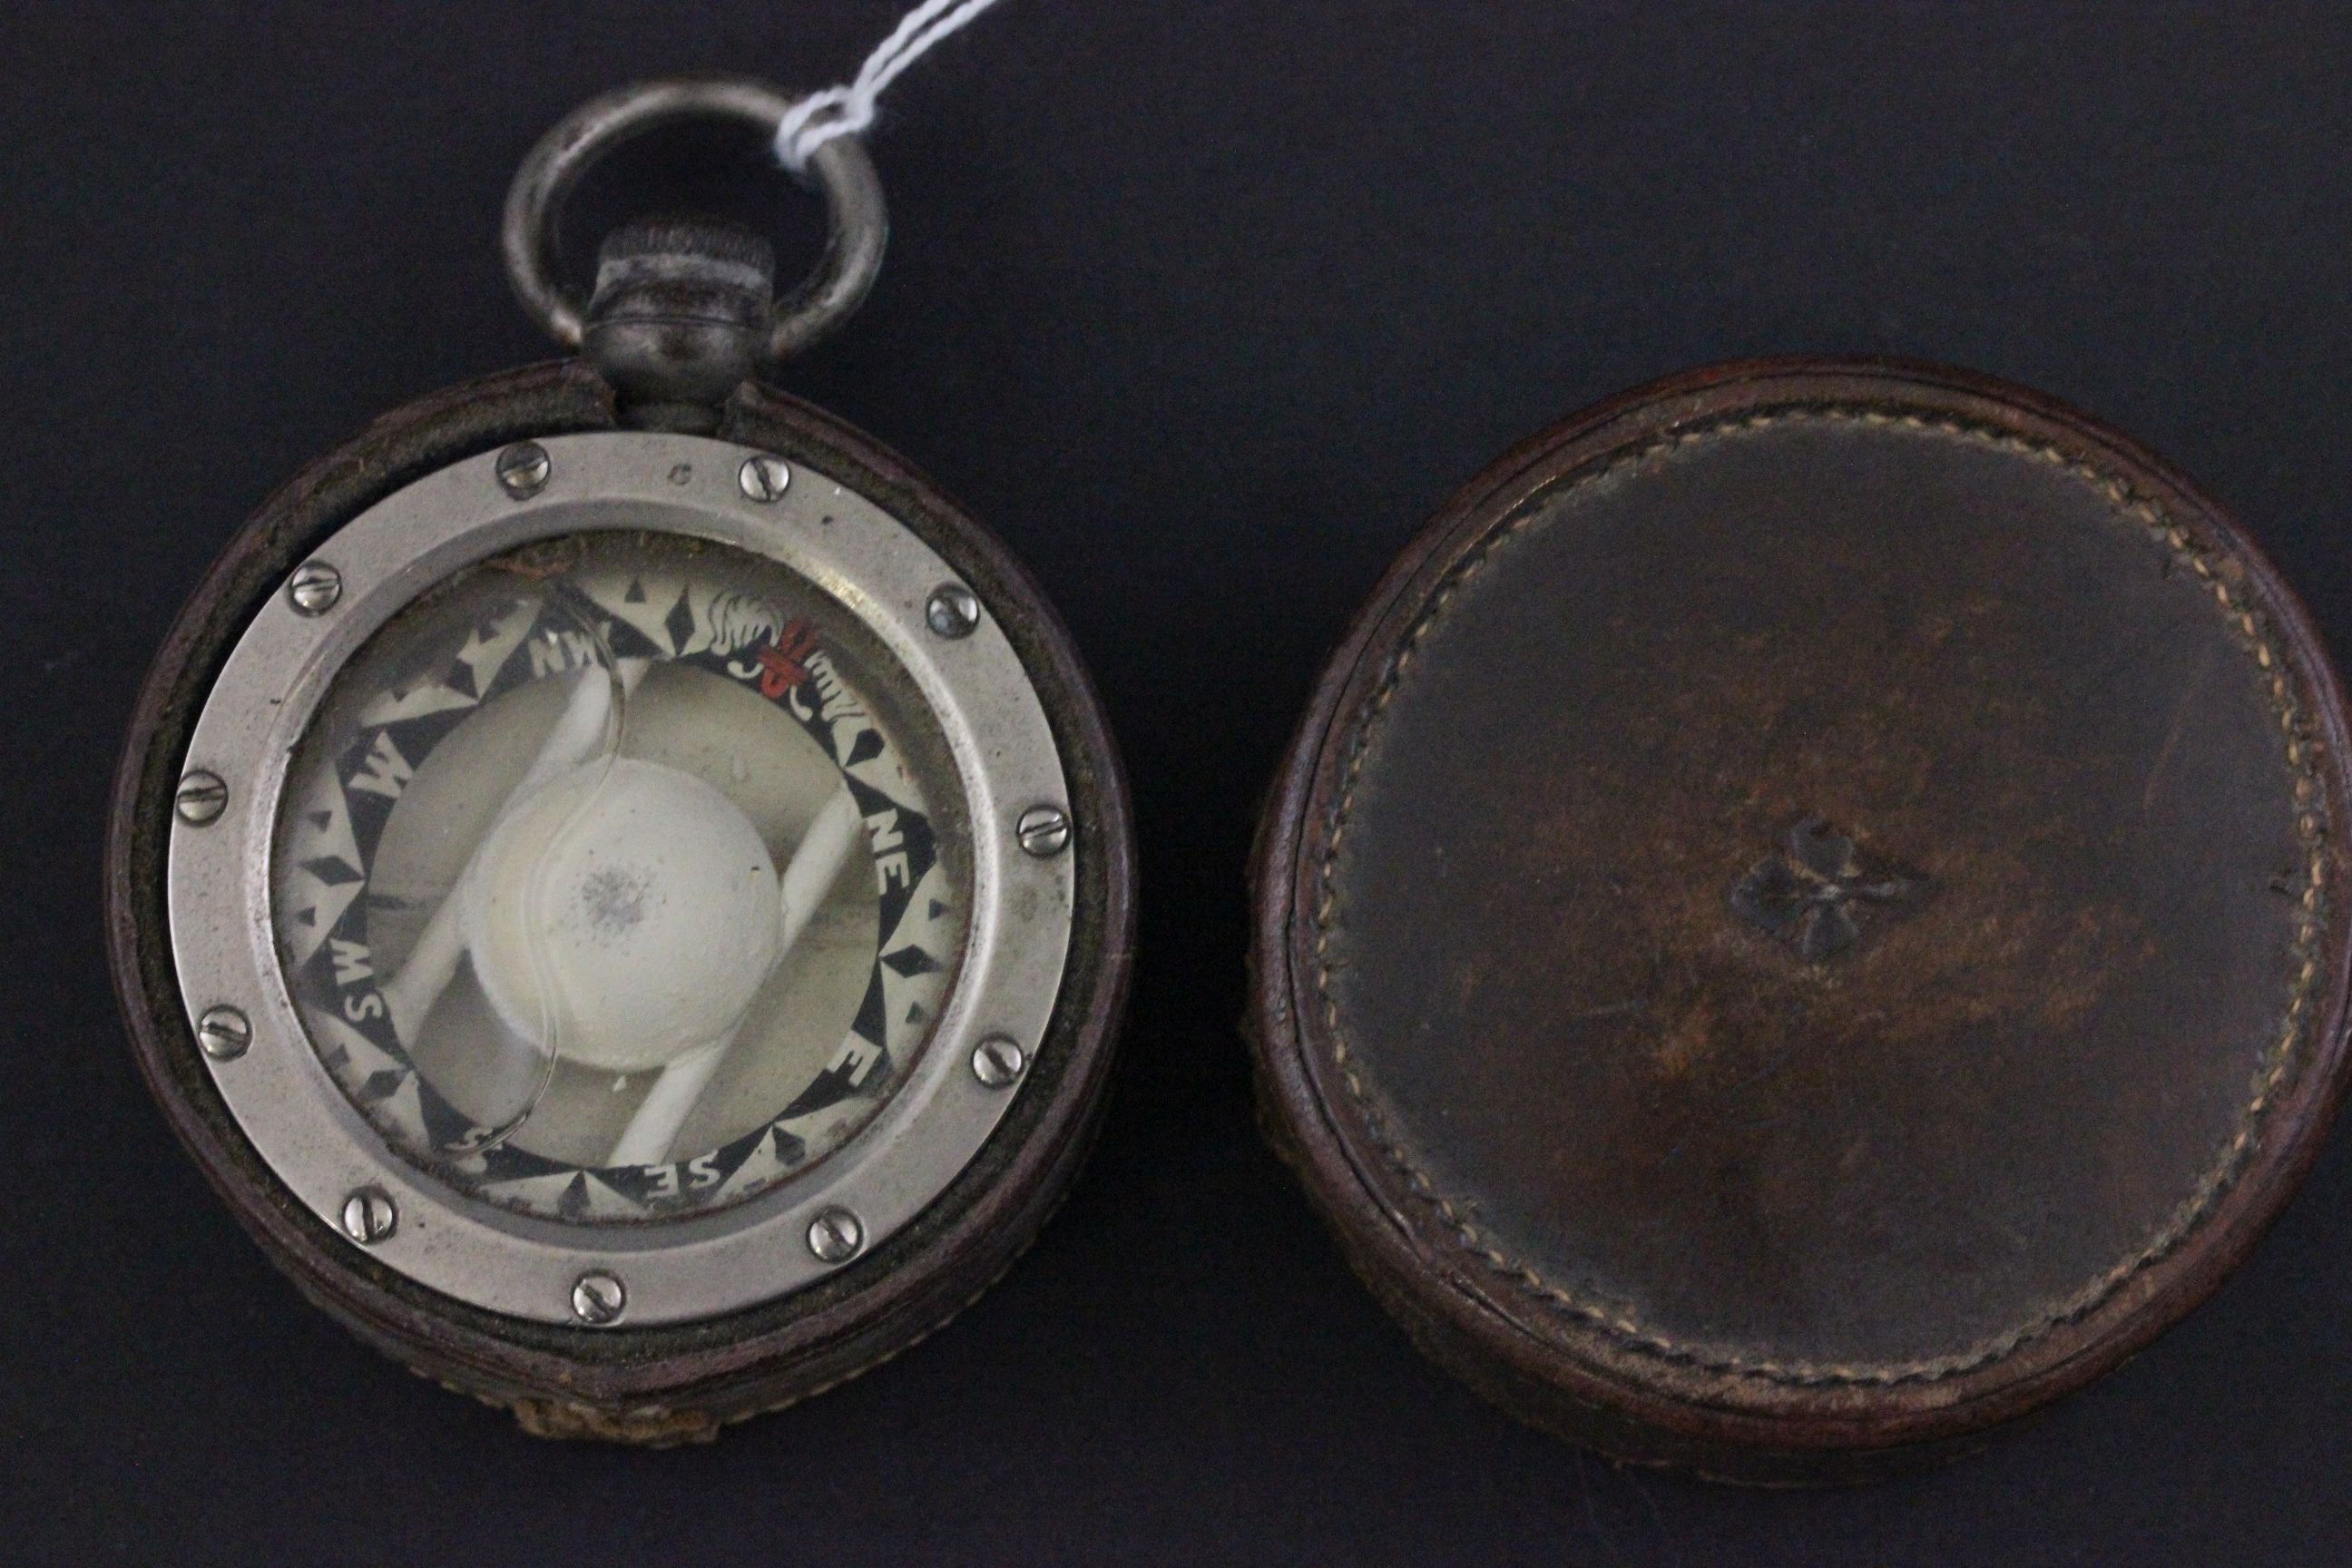 A vintage steel cased compass with leather case which is stamped with a Fleur de lis motif